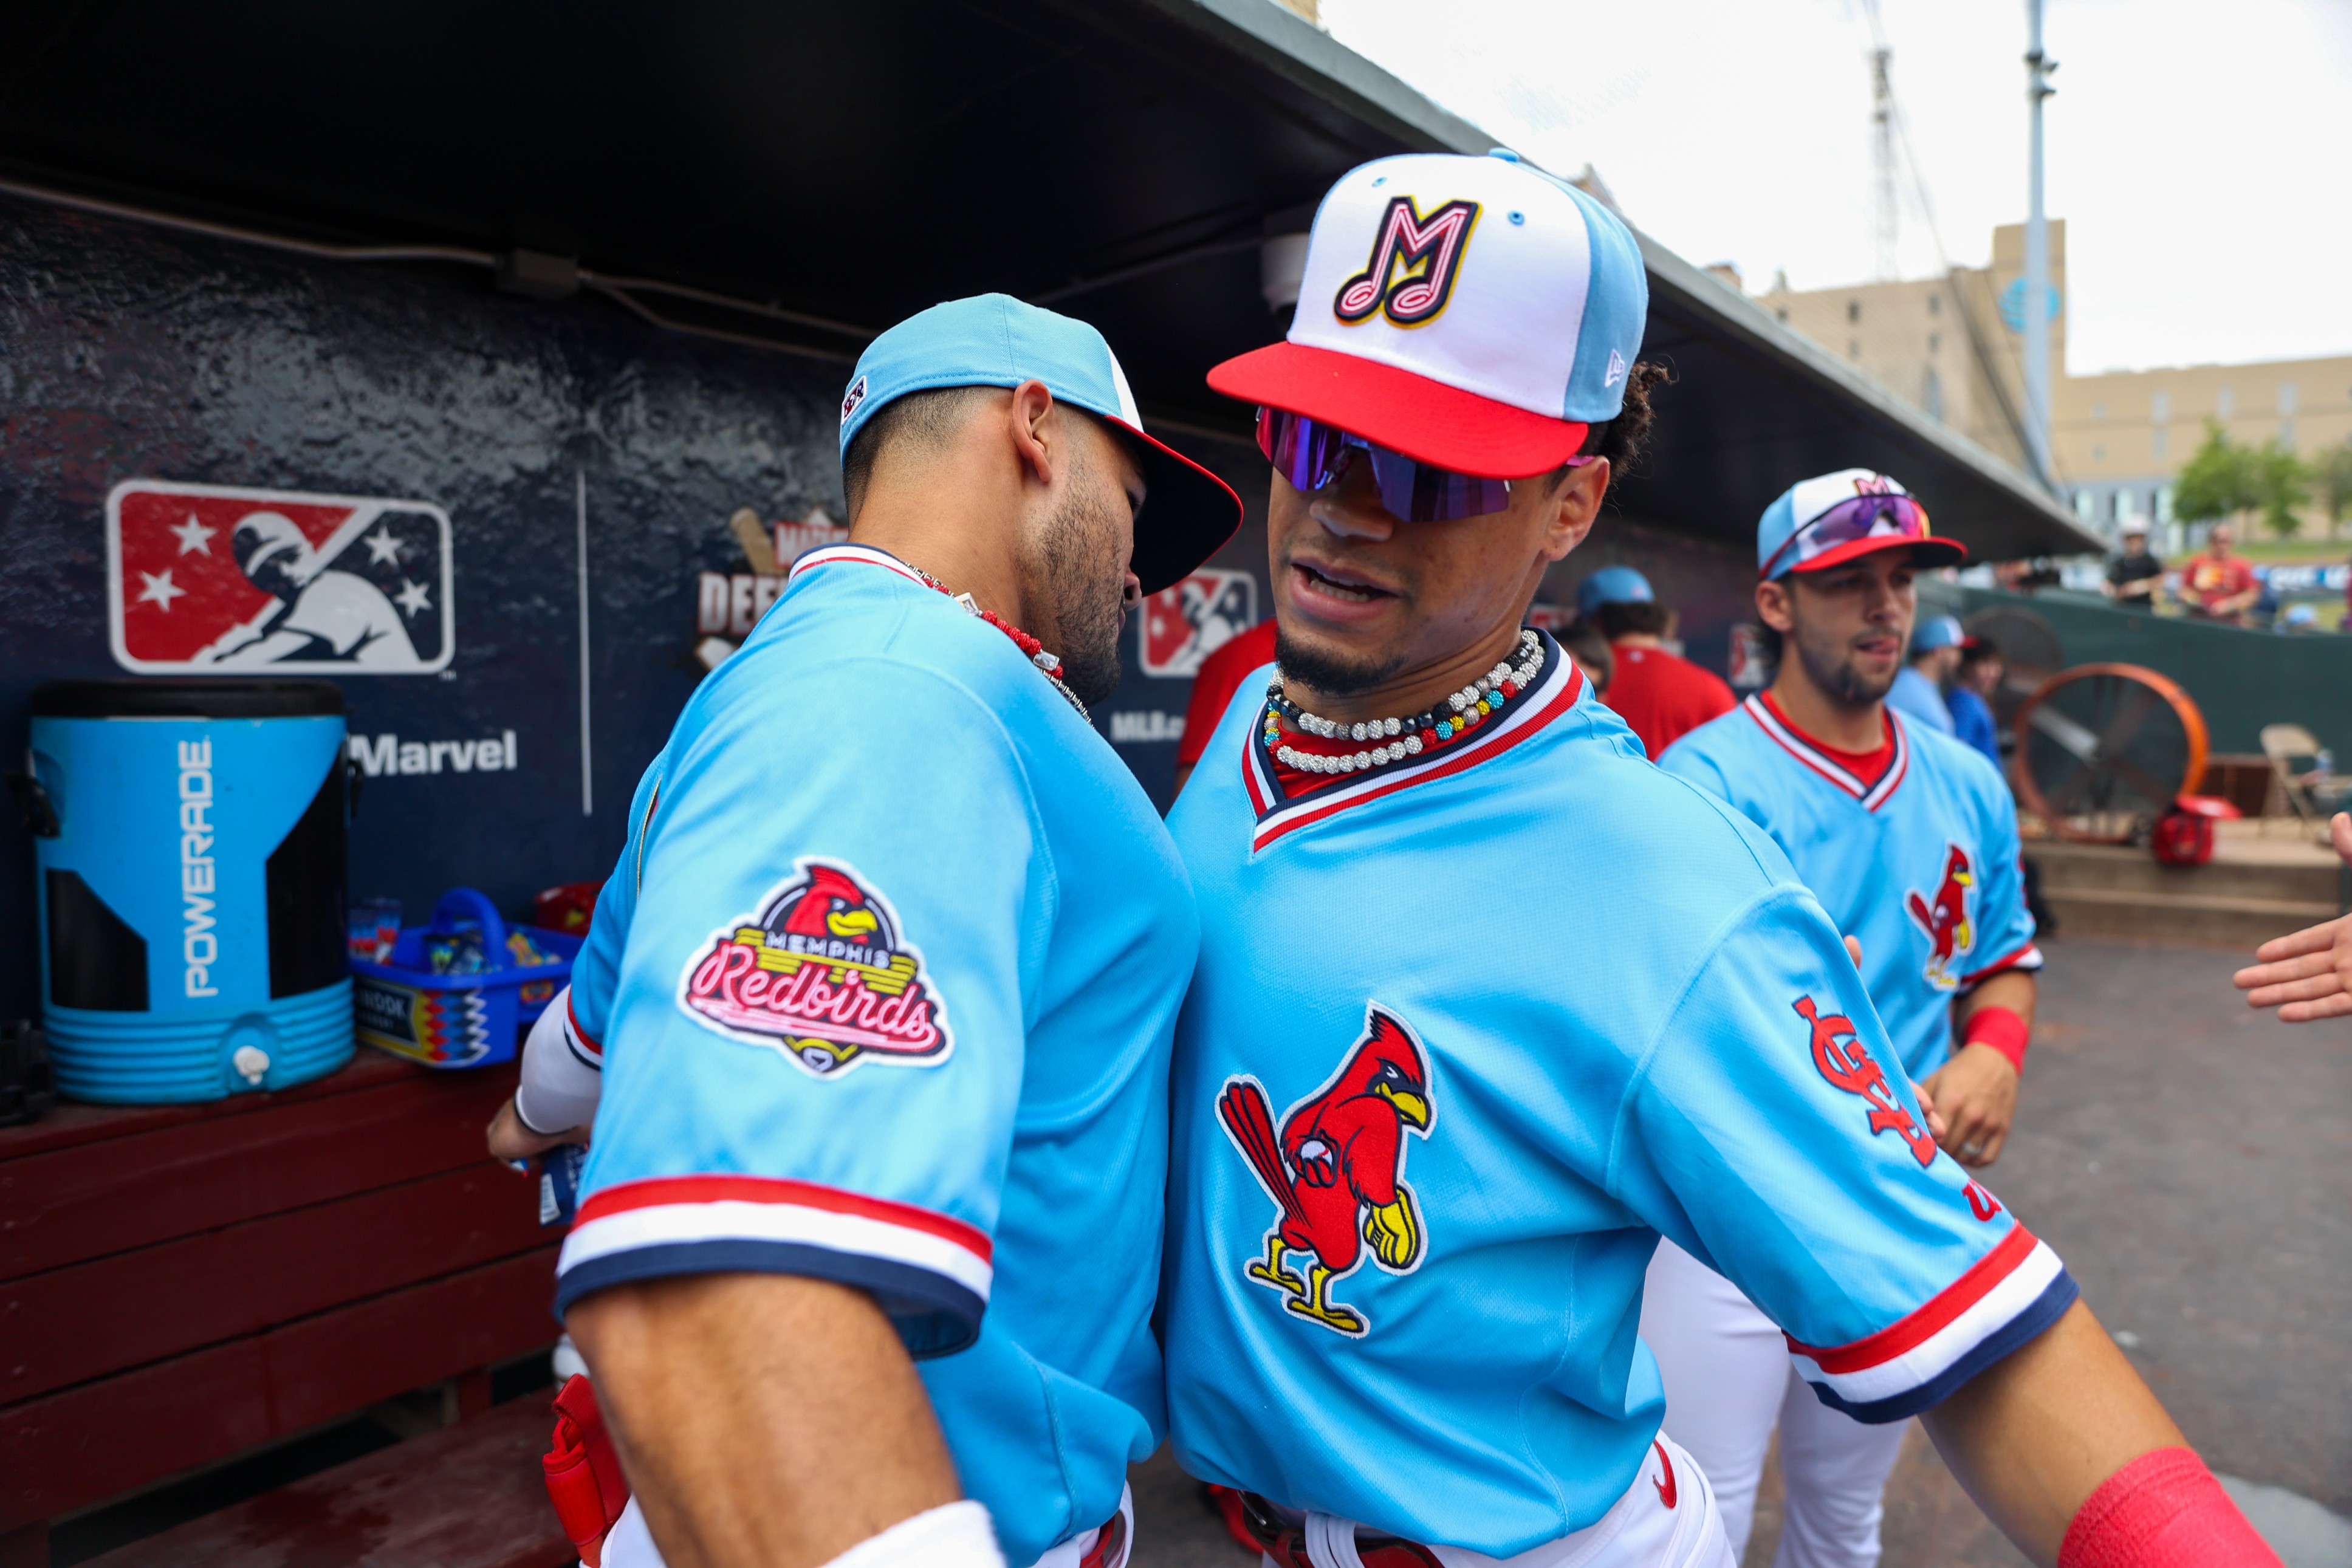 Memphis Redbirds on X: How fly are these jerseys? 🔥 The first